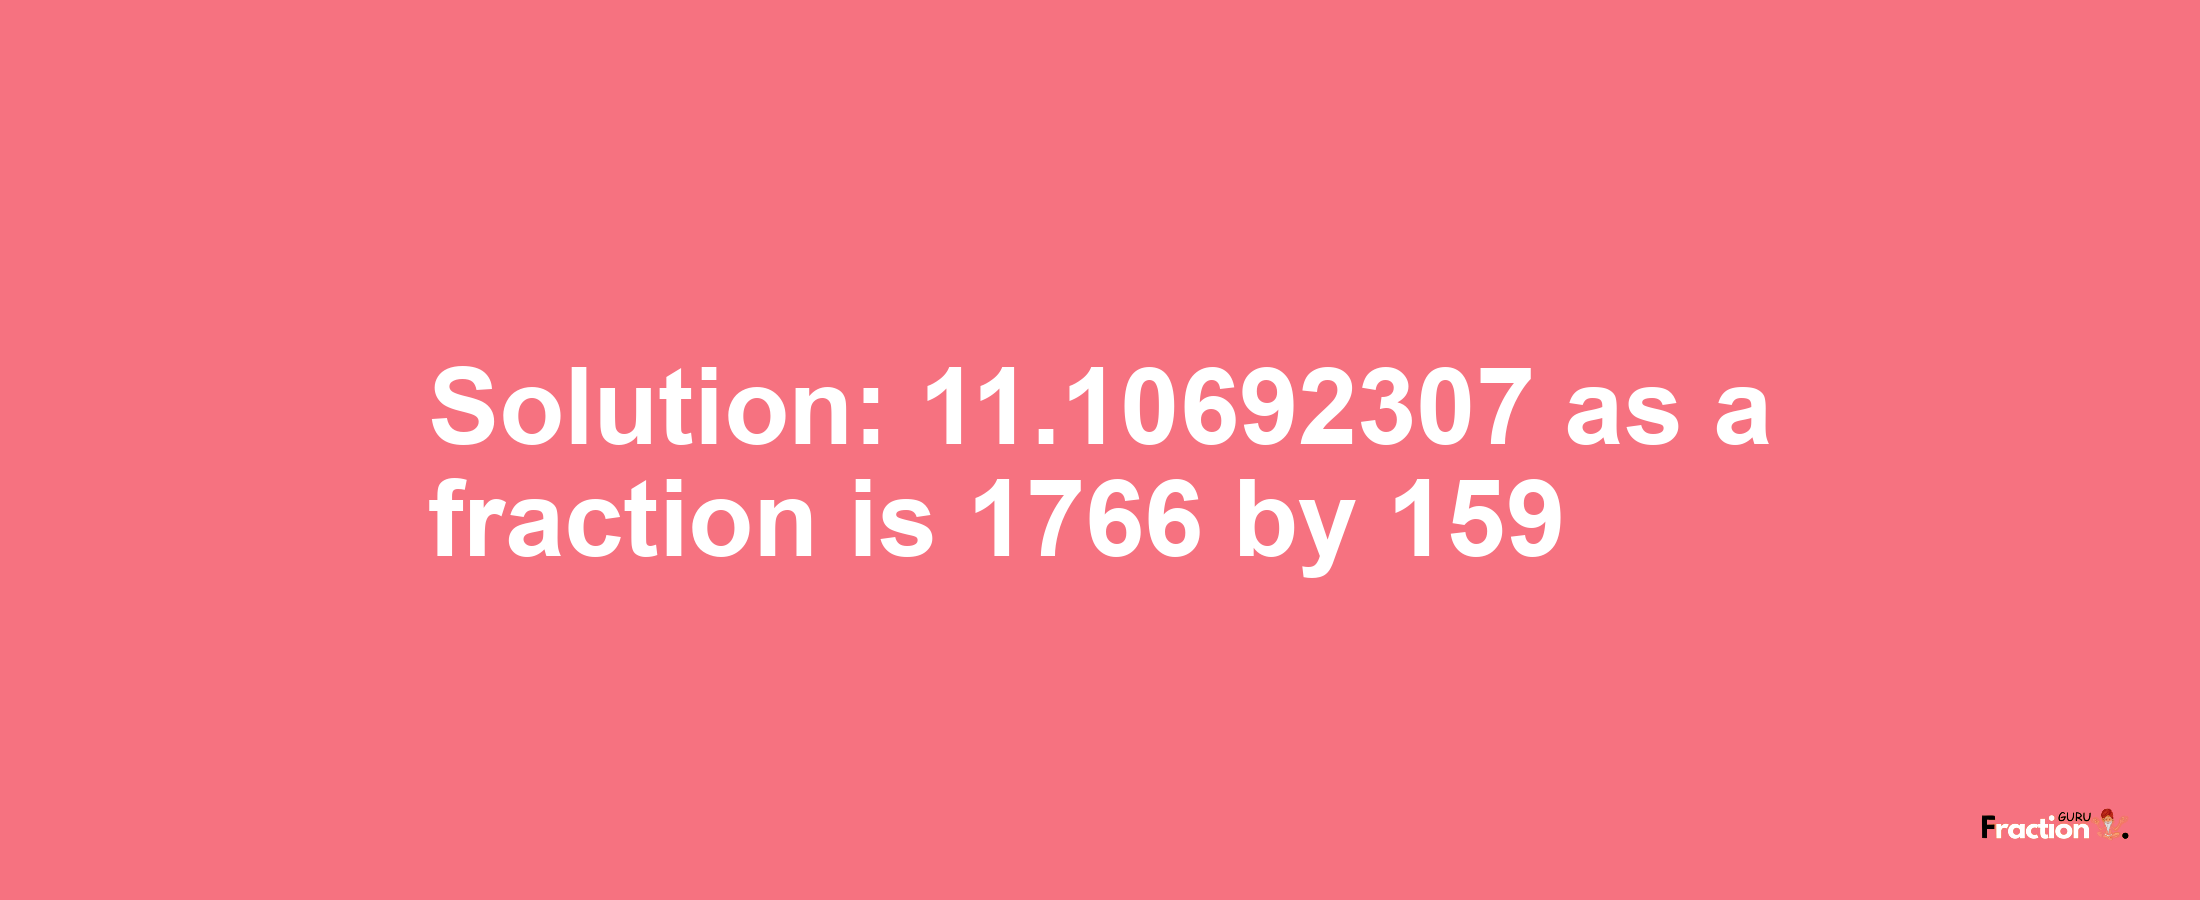 Solution:11.10692307 as a fraction is 1766/159